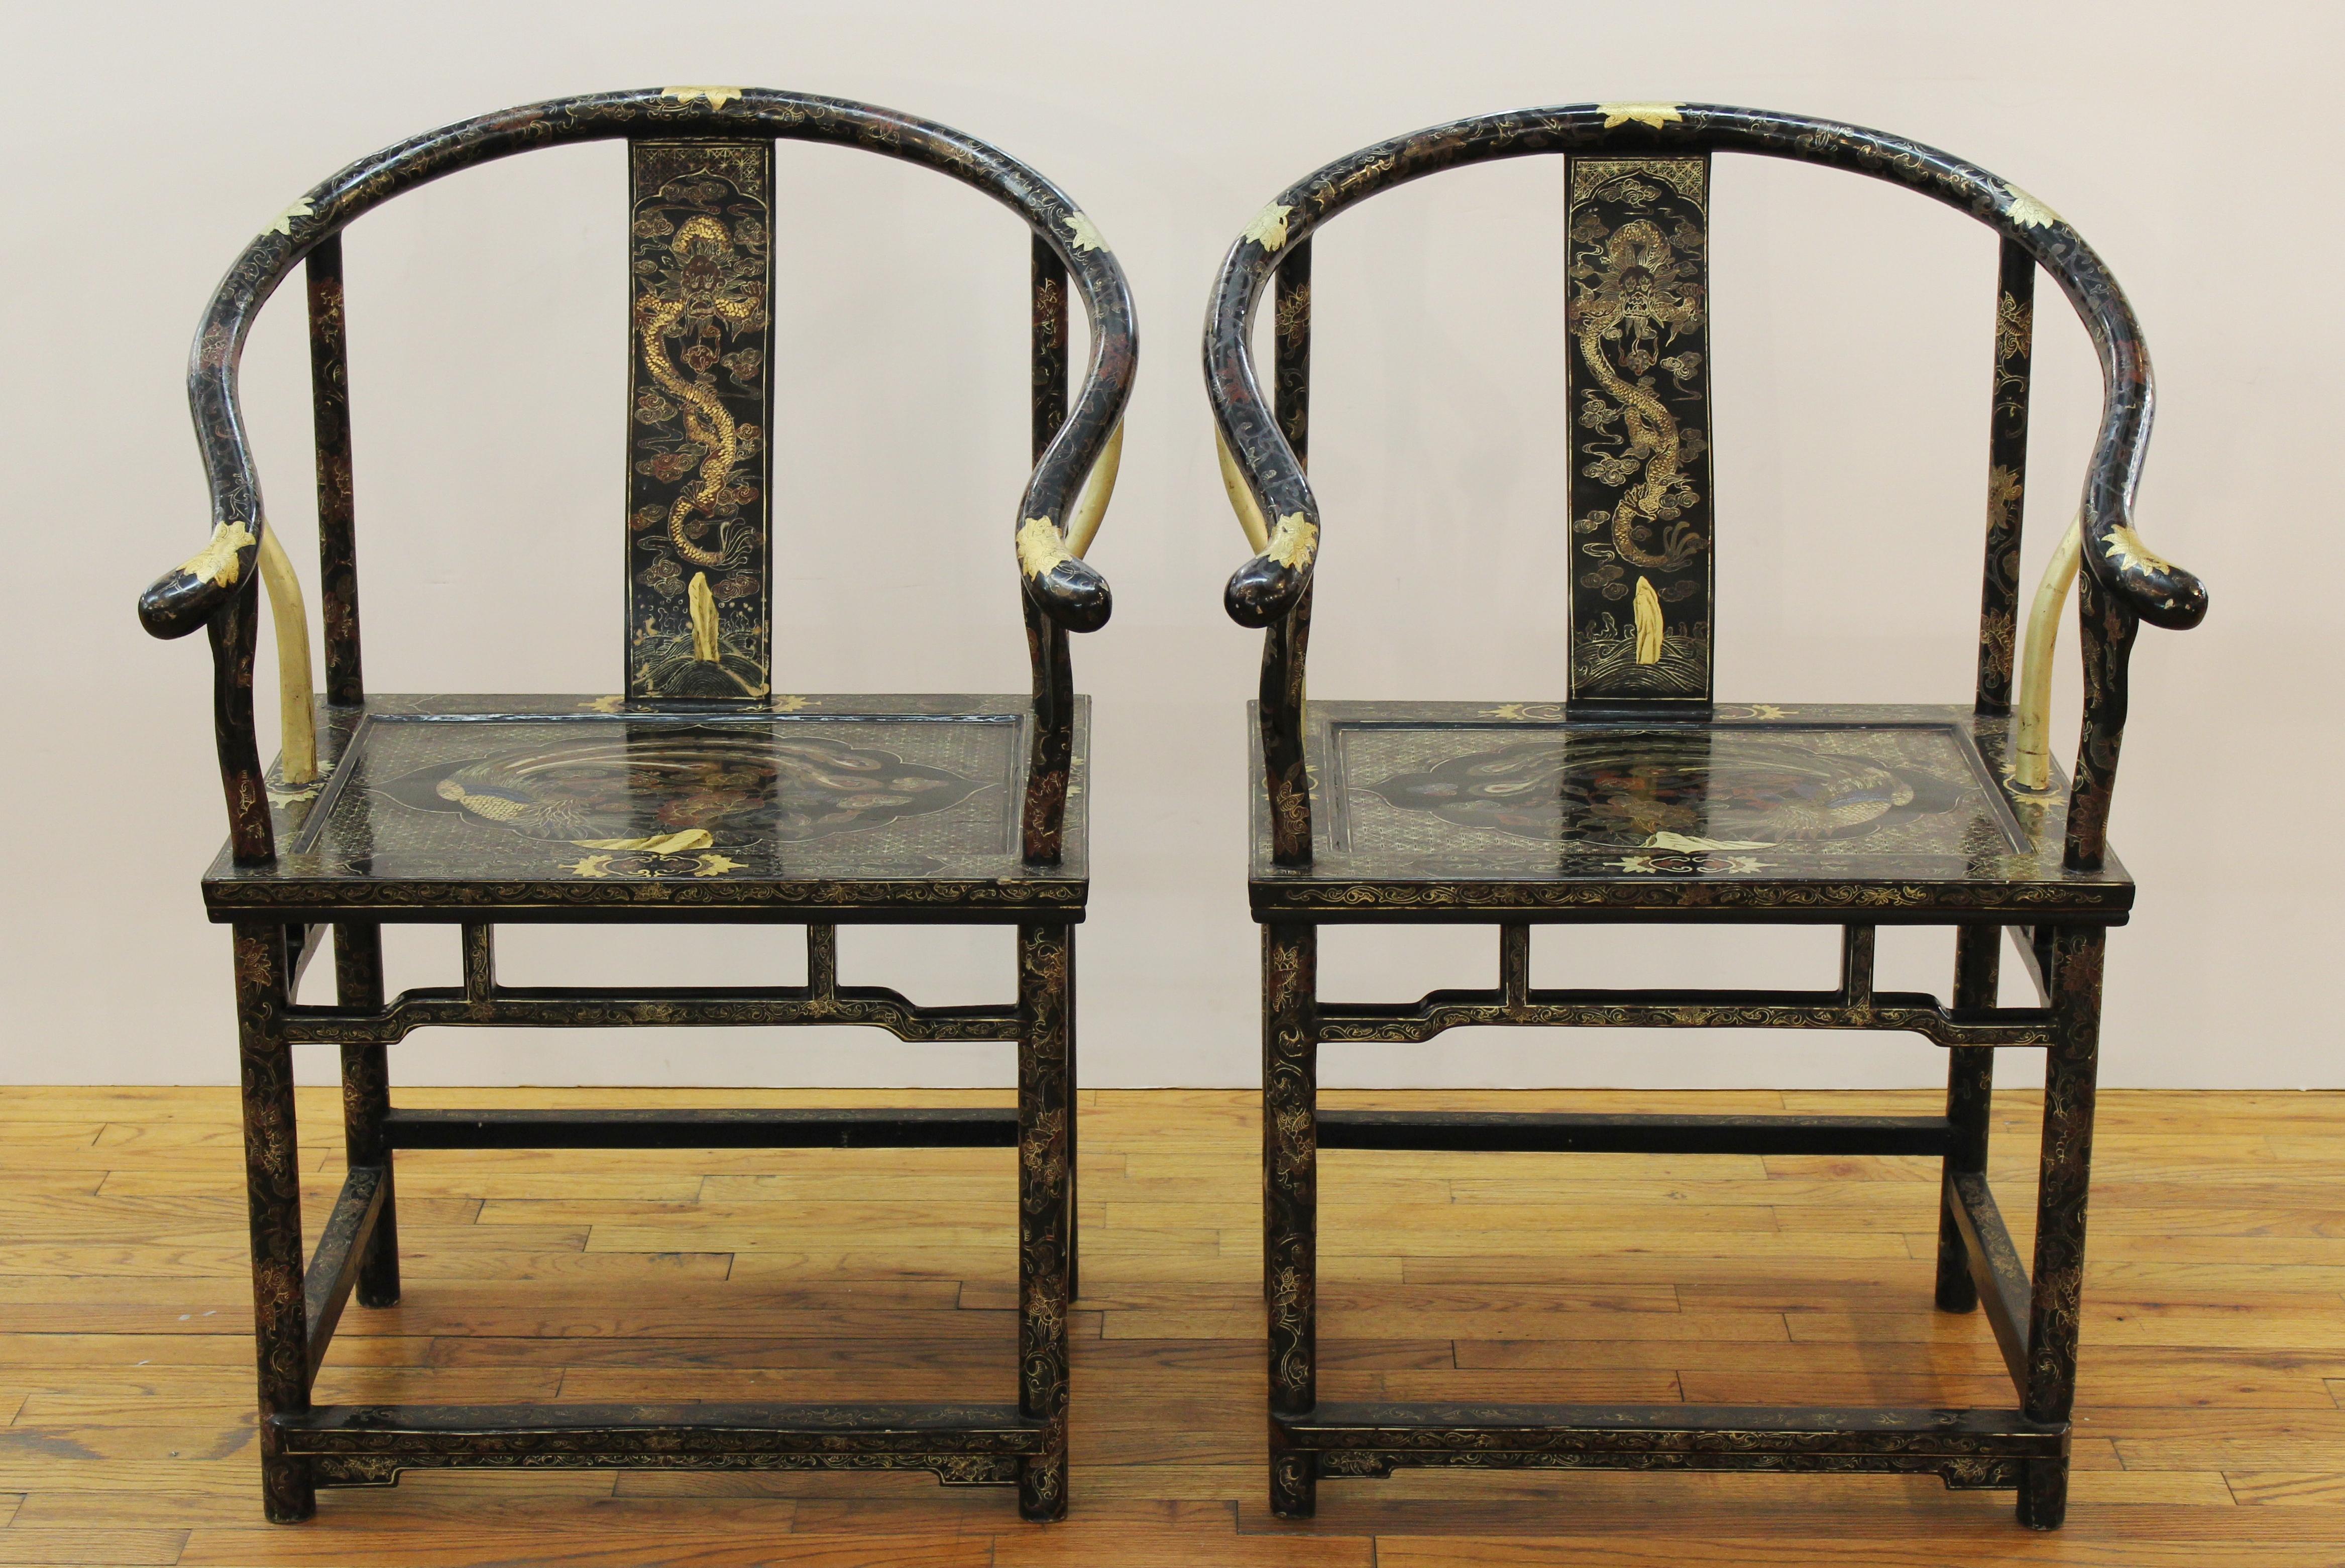 Pair of Chinese horseshoe back armchairs with gold painted decoration of dragons on the backrests and peacocks on the seats